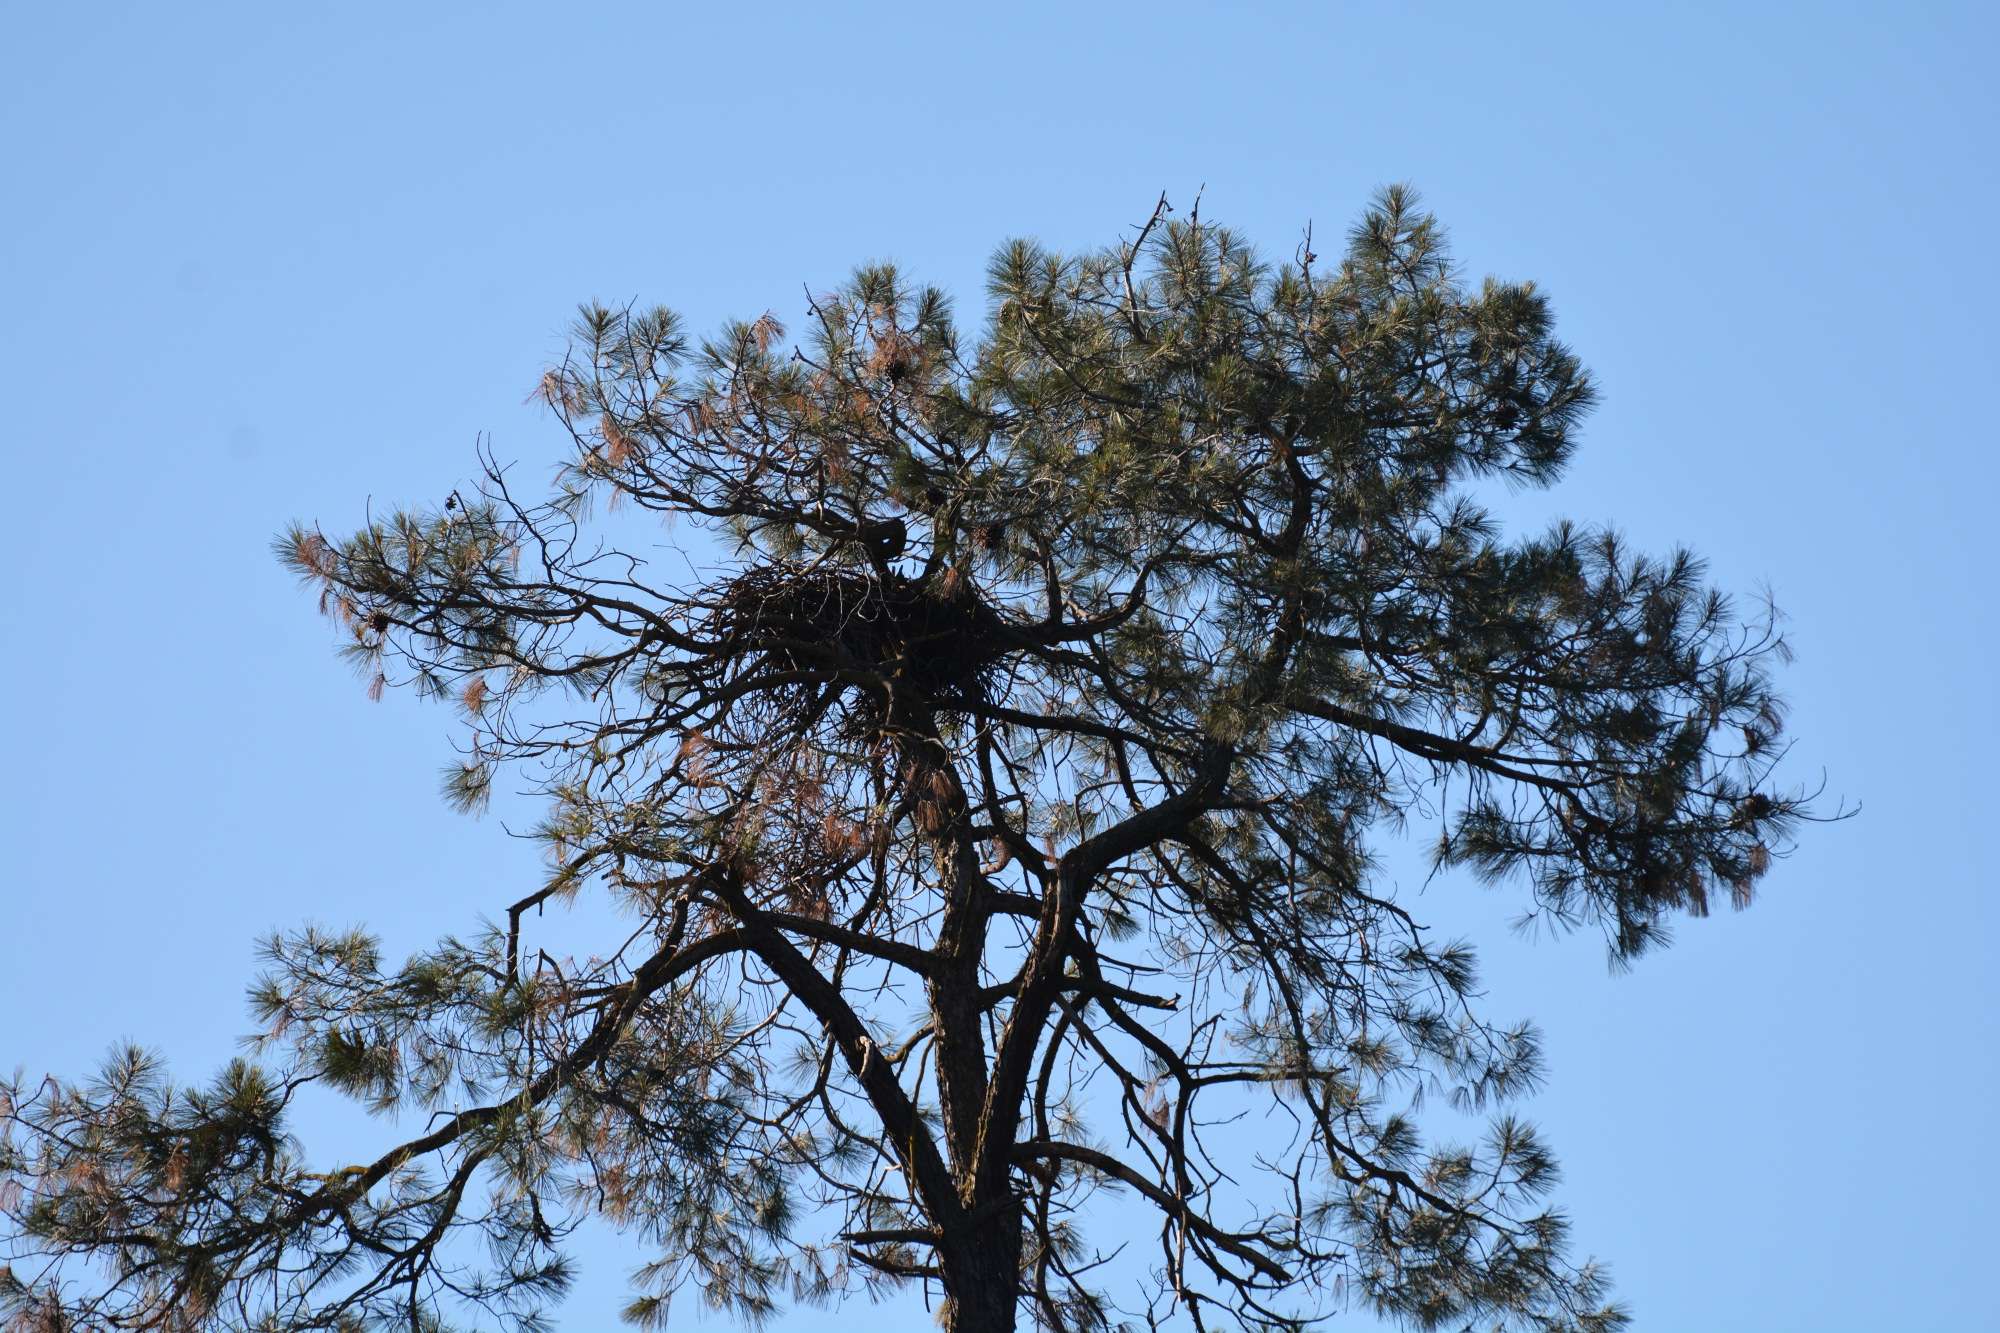 This eagle's nest houses a bald eagle that's been flying around over the San Jose State team's heads.